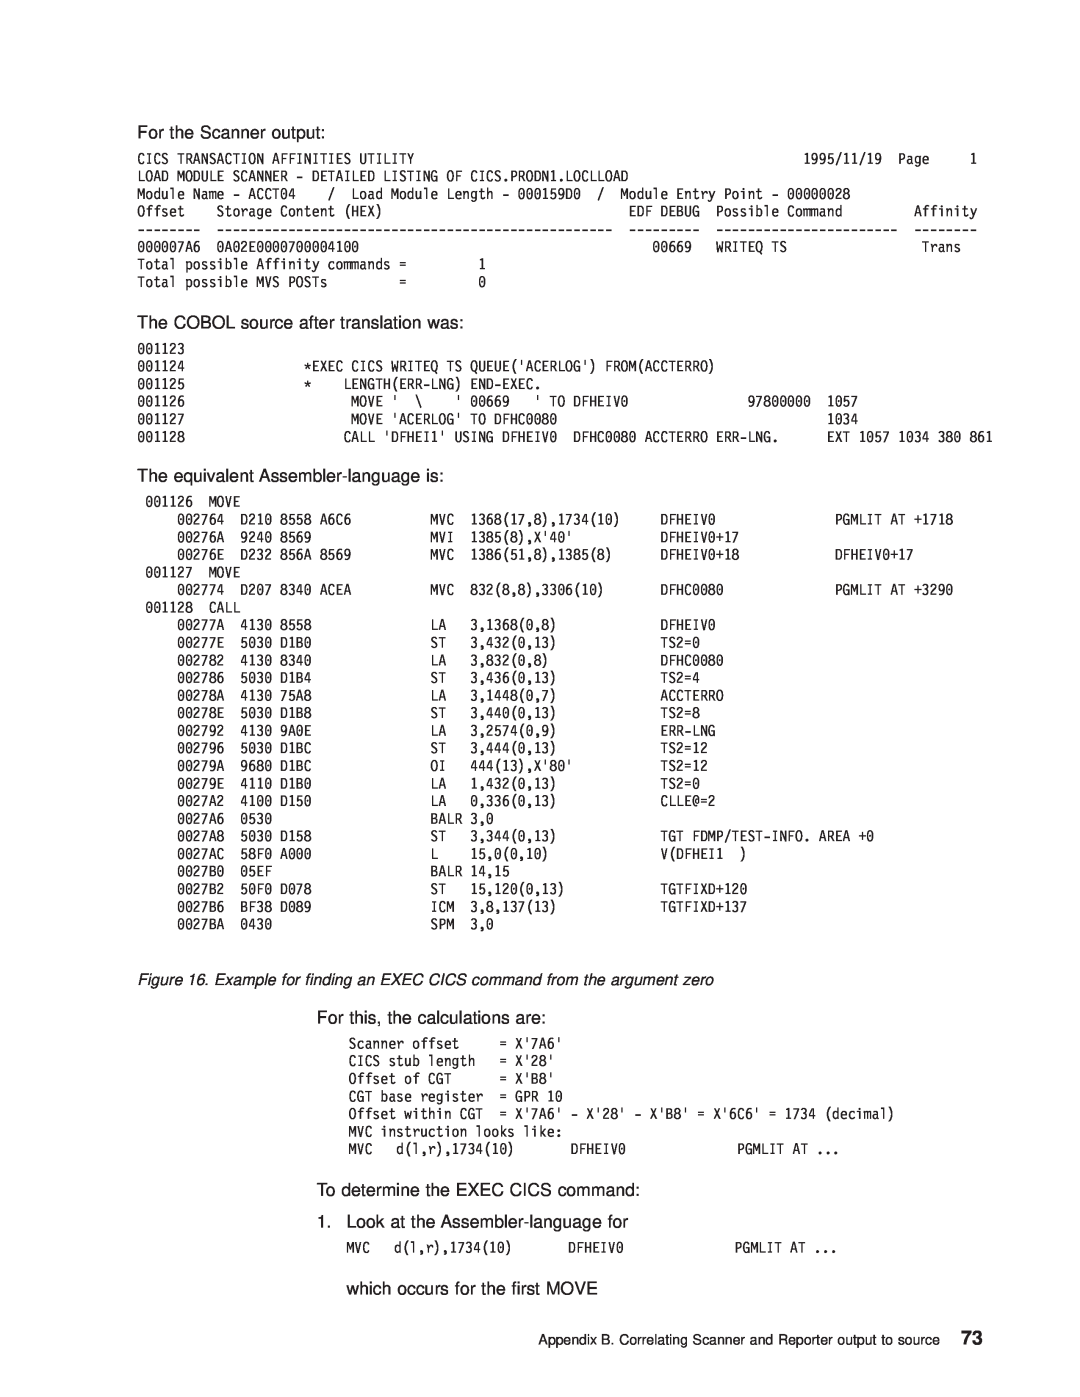 IBM OS manual For the Scanner output, The COBOL source after translation was, The equivalent Assembler-language is 